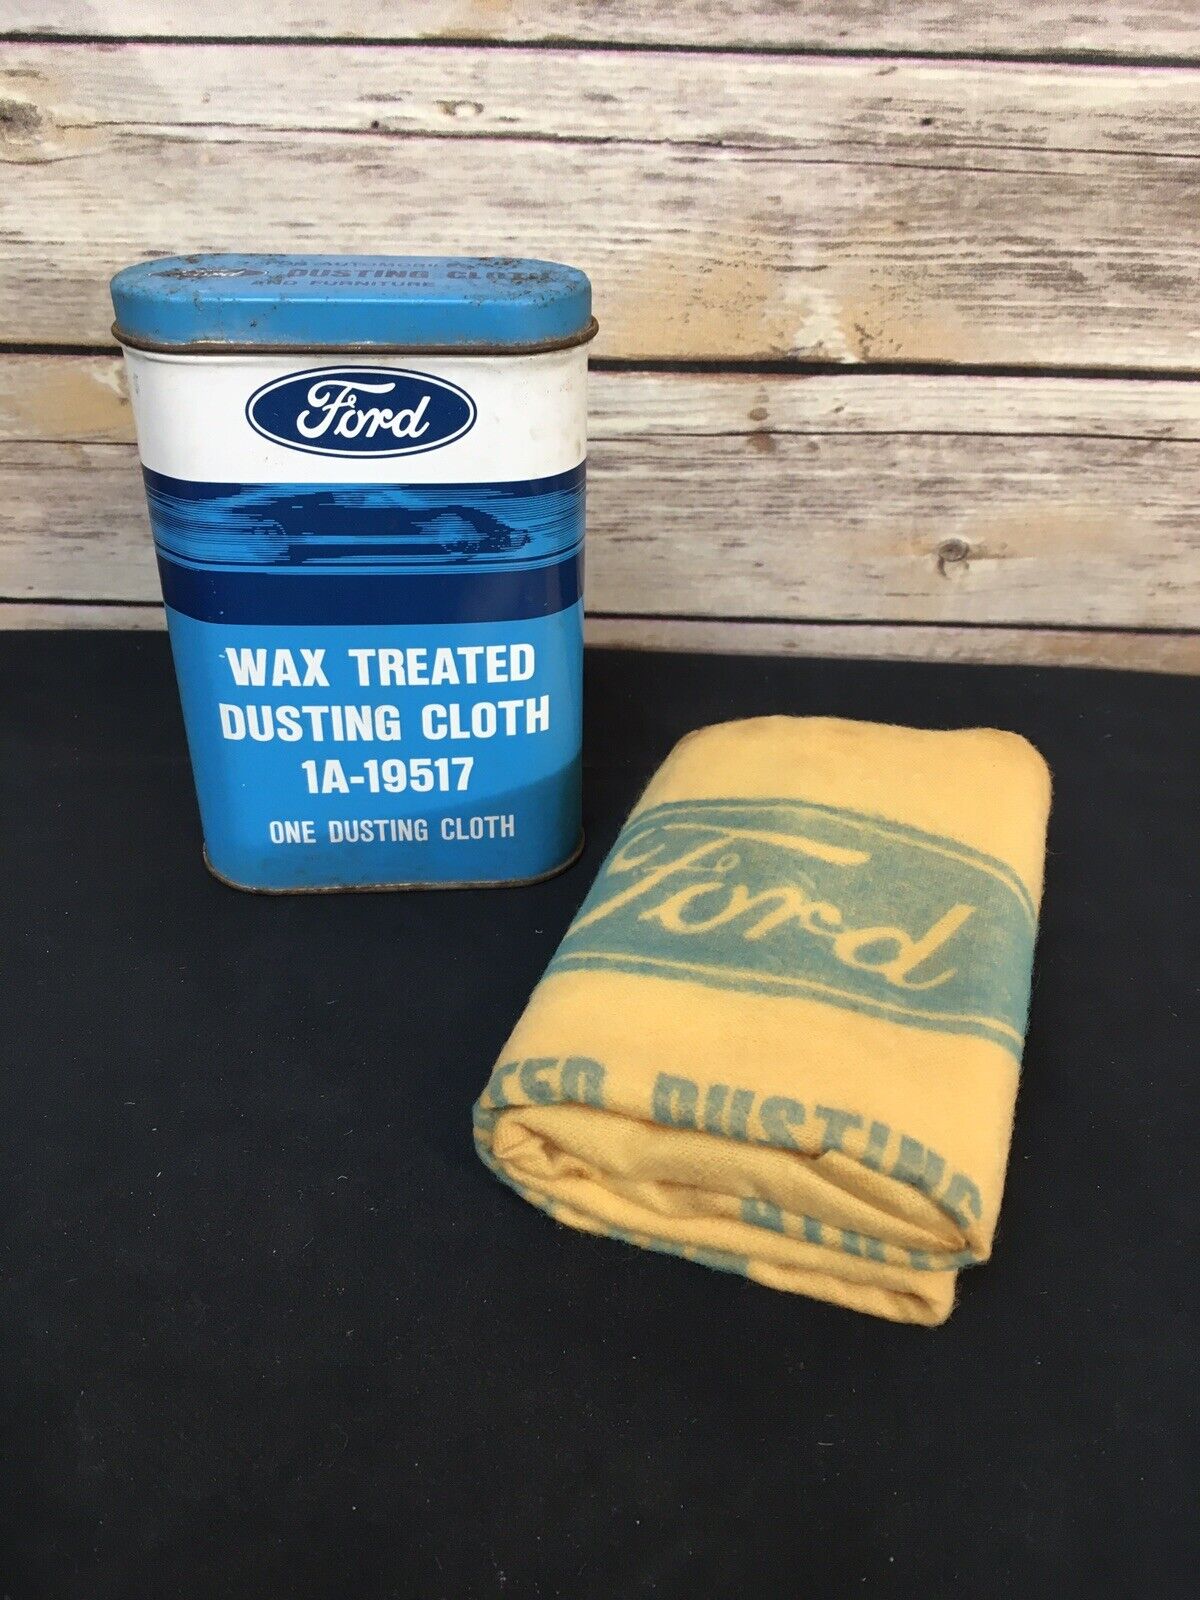 Vintage 1960's - 70's Ford Wax Treated Dusting Cloth 1A-19517 Tin & Cloth NOS